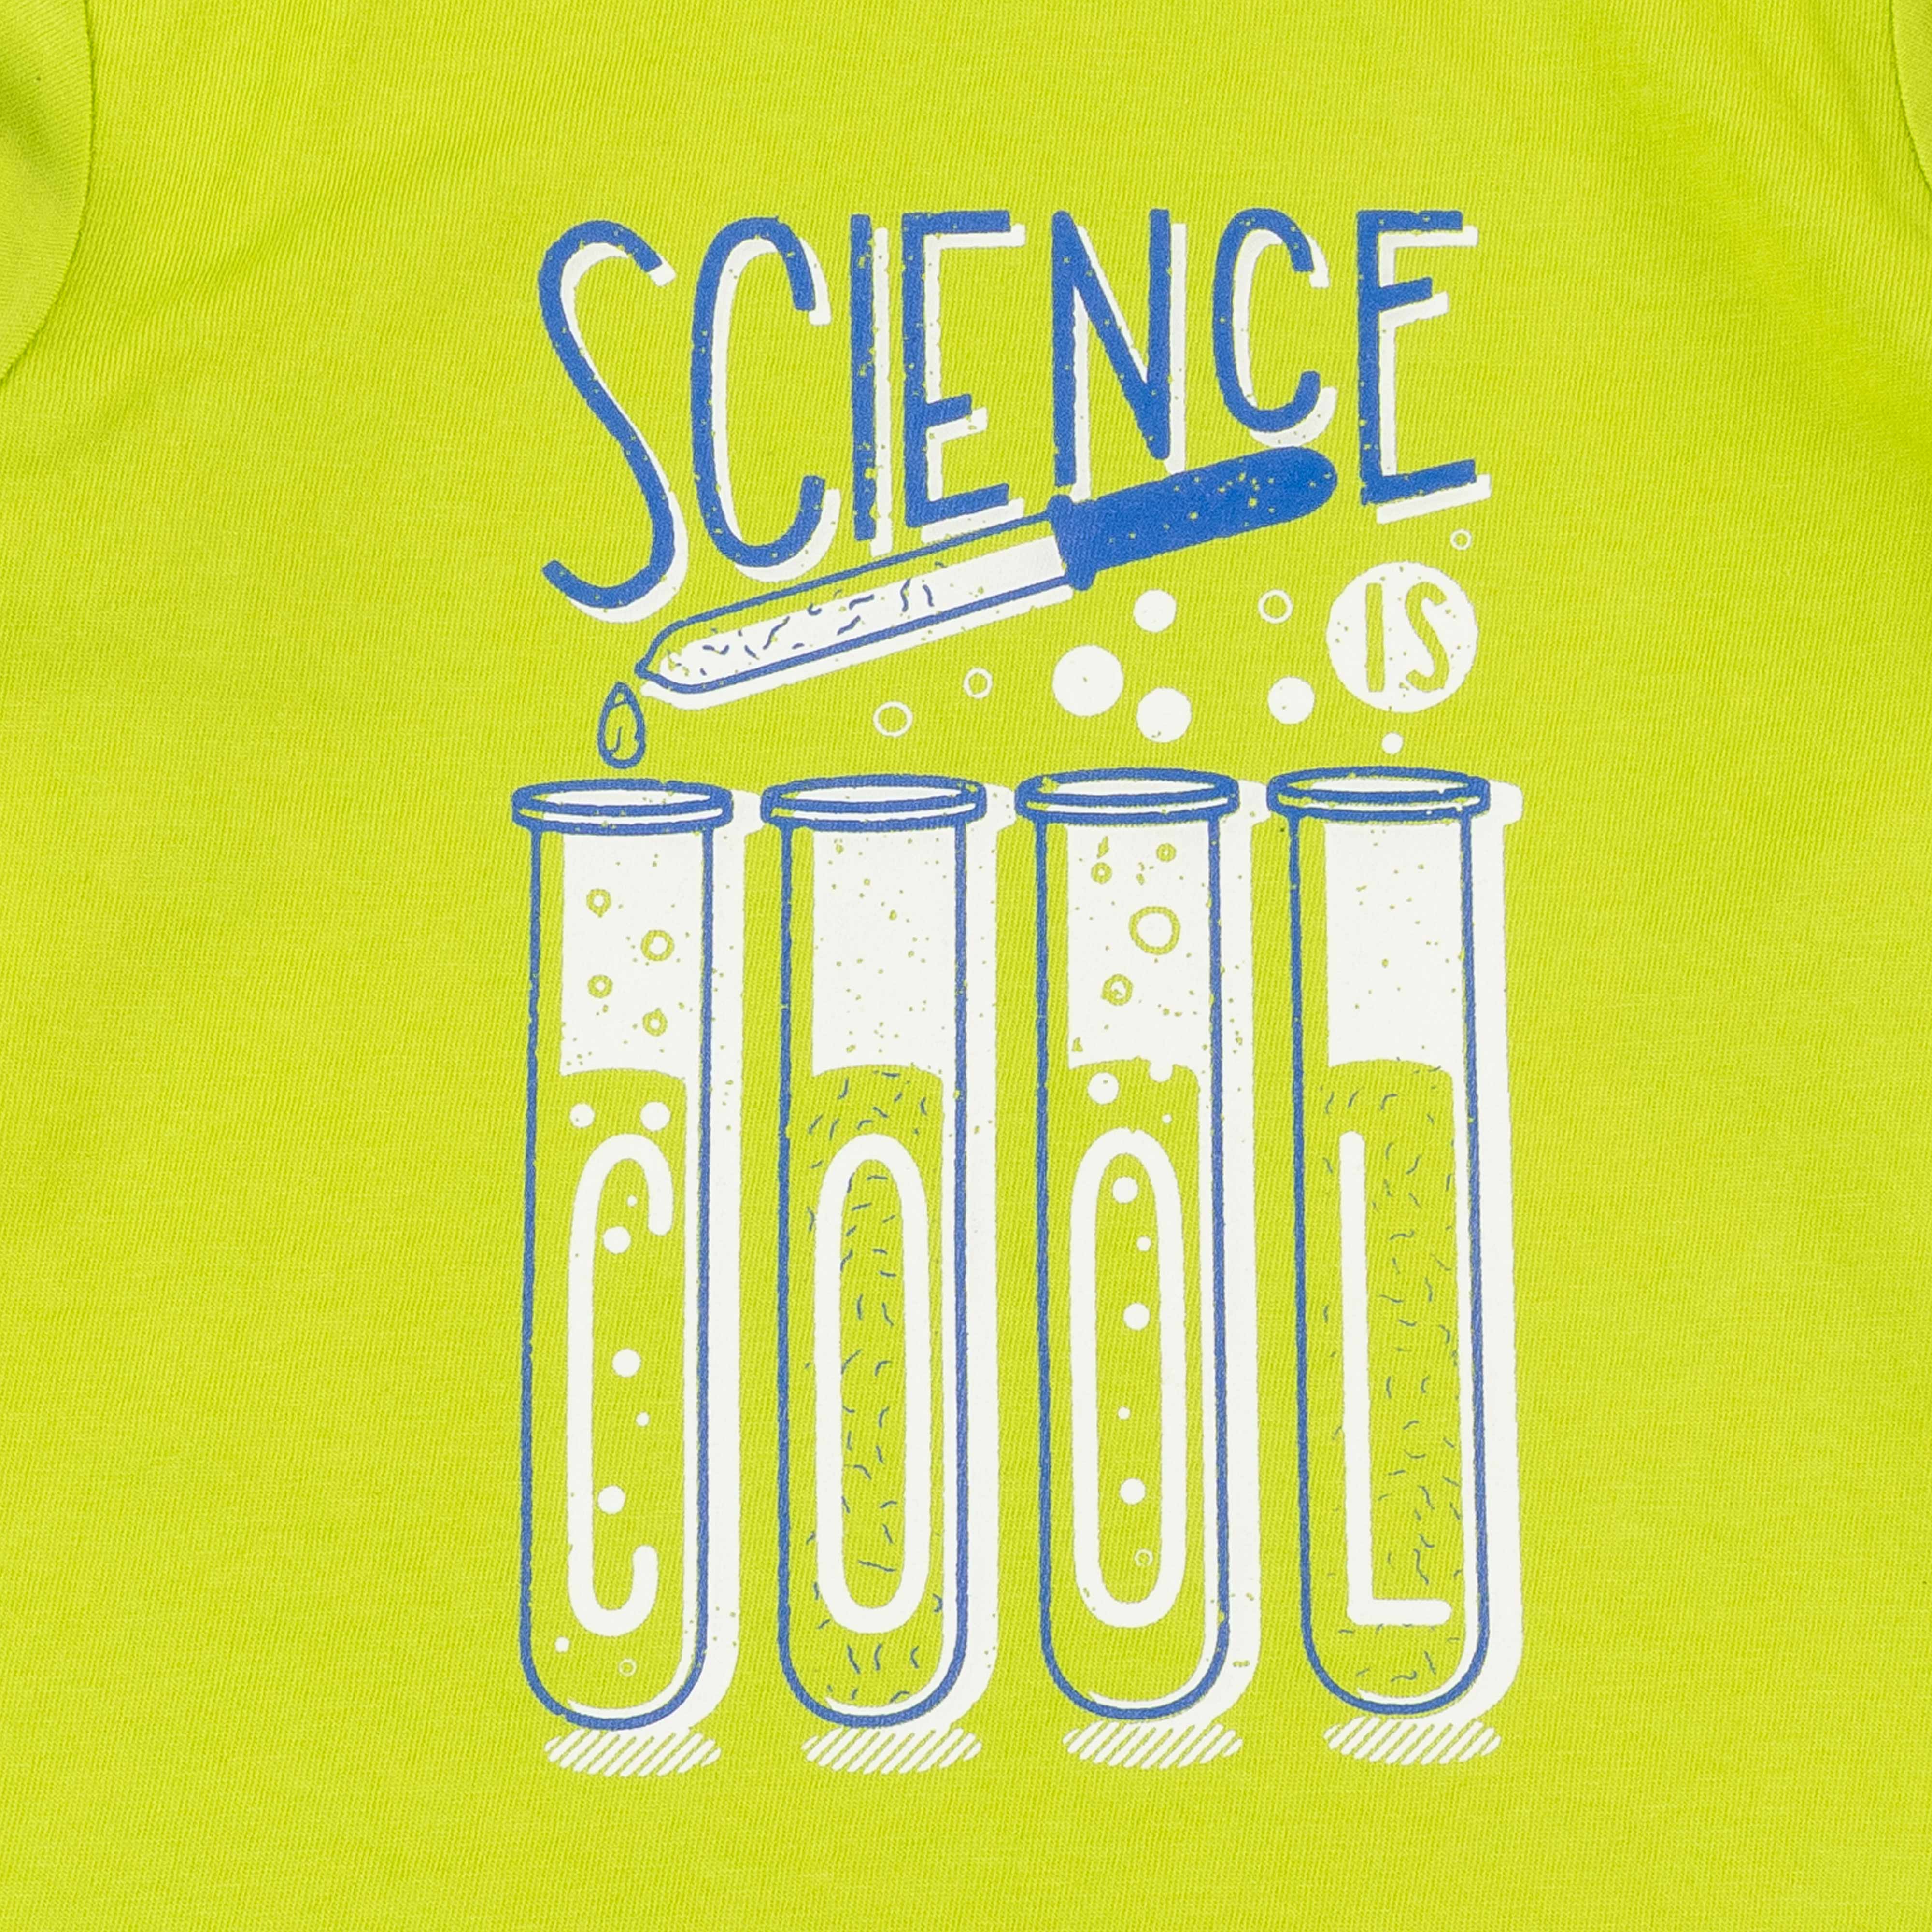 Young Boys Full Sleeve Science Printed T-Shirt